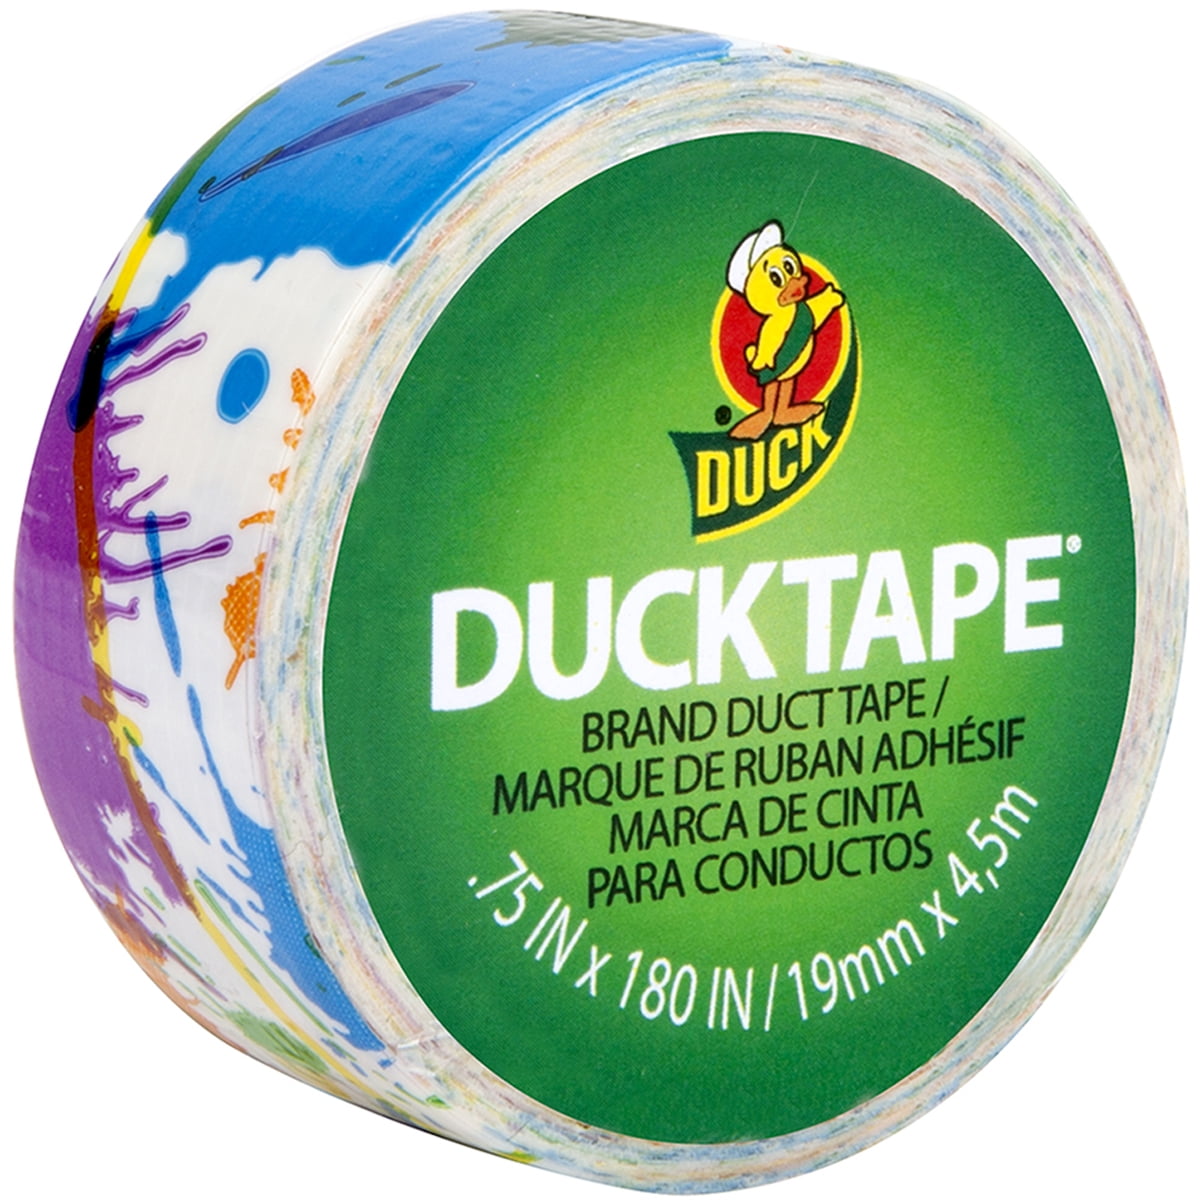 Ducklings DuckTape 9 mil 3/4 x 180 Candy Dots 283263, 1 - Food 4 Less